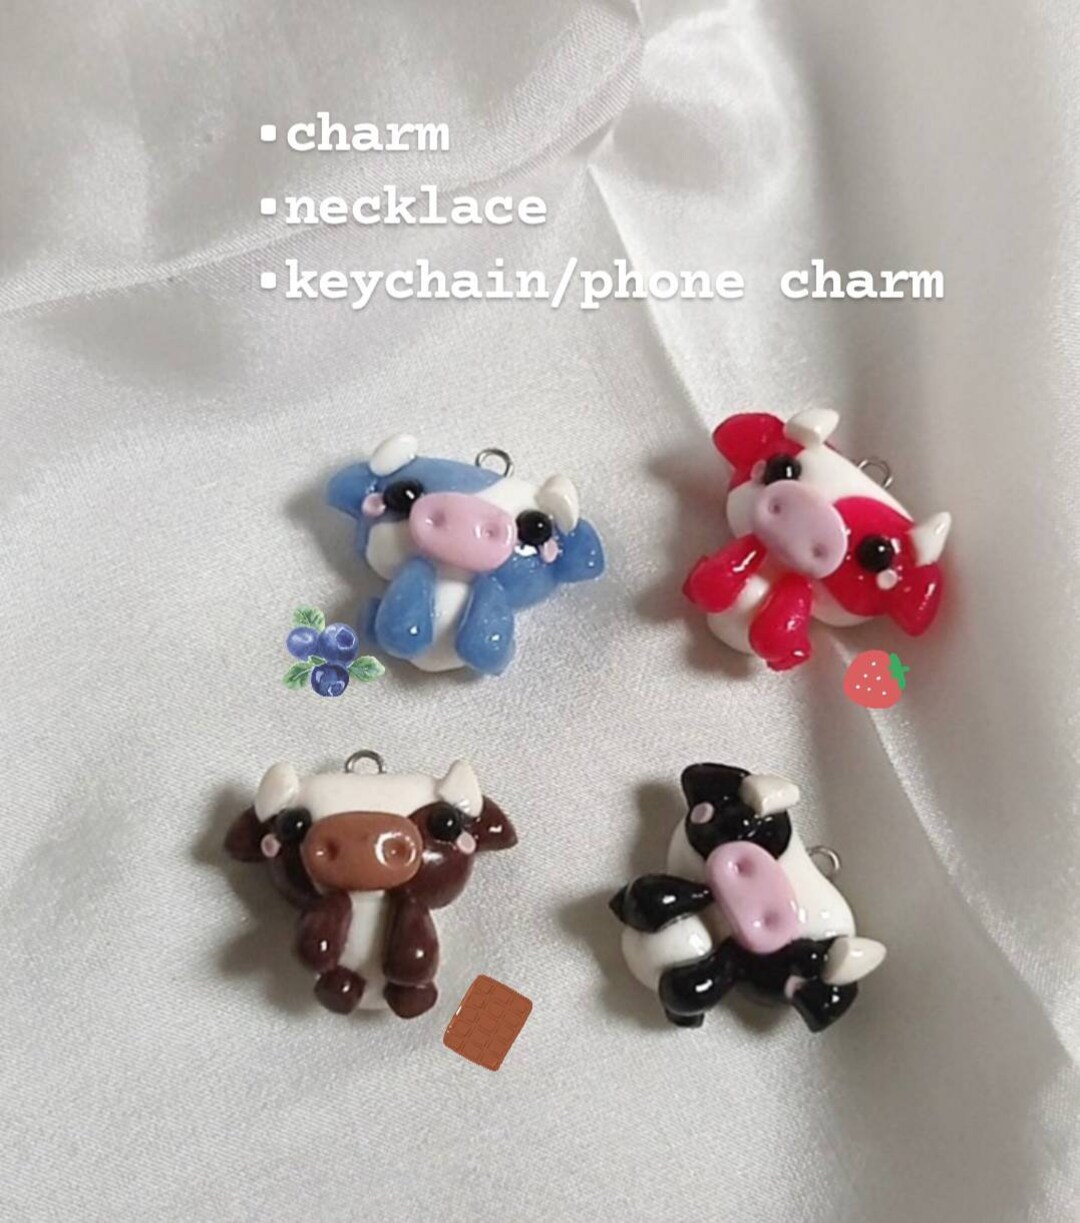 Lot of 4 Pink Cow Charms Farm Animal Charms Pet Charm Animal Charms DIY Jewelry Making Rose Gold Charms Inspirational Charms 14mmx11mm